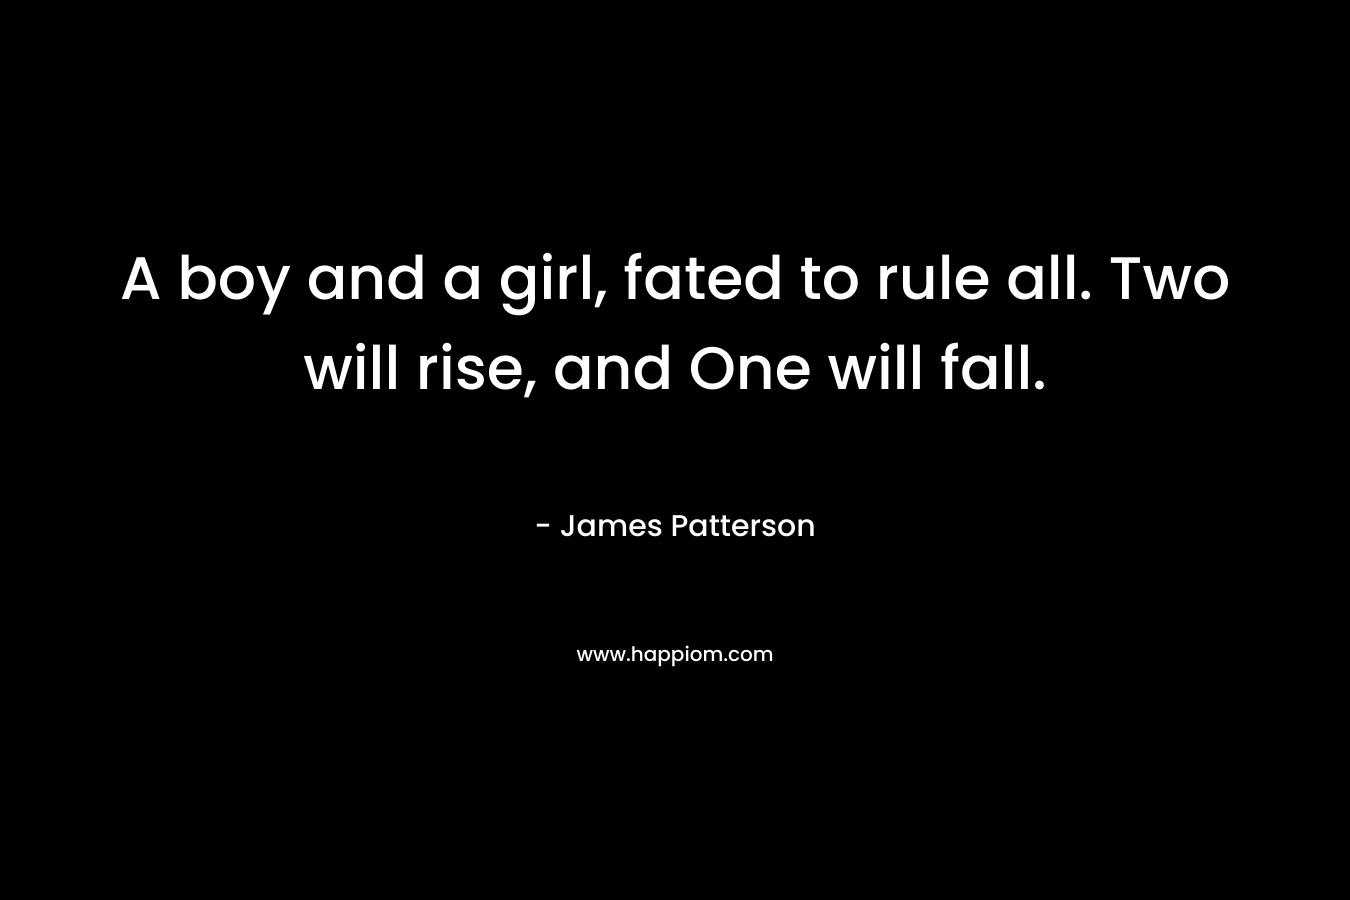 A boy and a girl, fated to rule all. Two will rise, and One will fall. – James Patterson